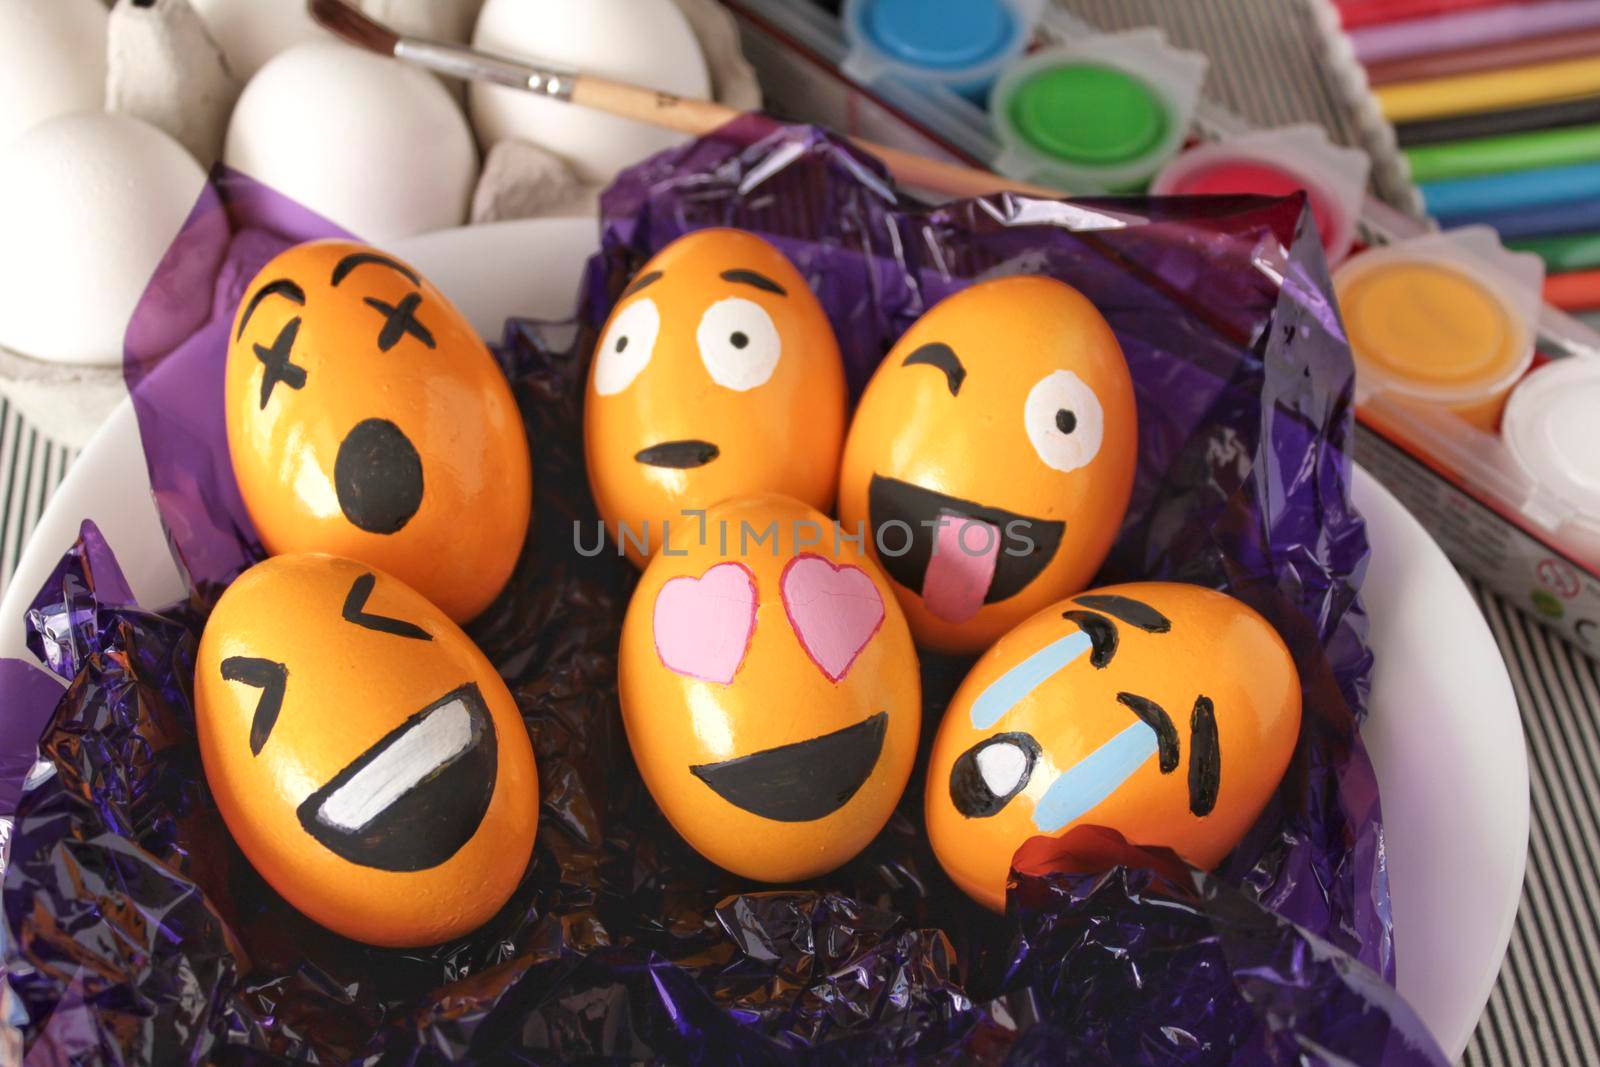 Alicante, Spain- March 18, 2021:Emoticons Easter Eggs on purple cellophane paper. More white eggs, brush and paints in the background.